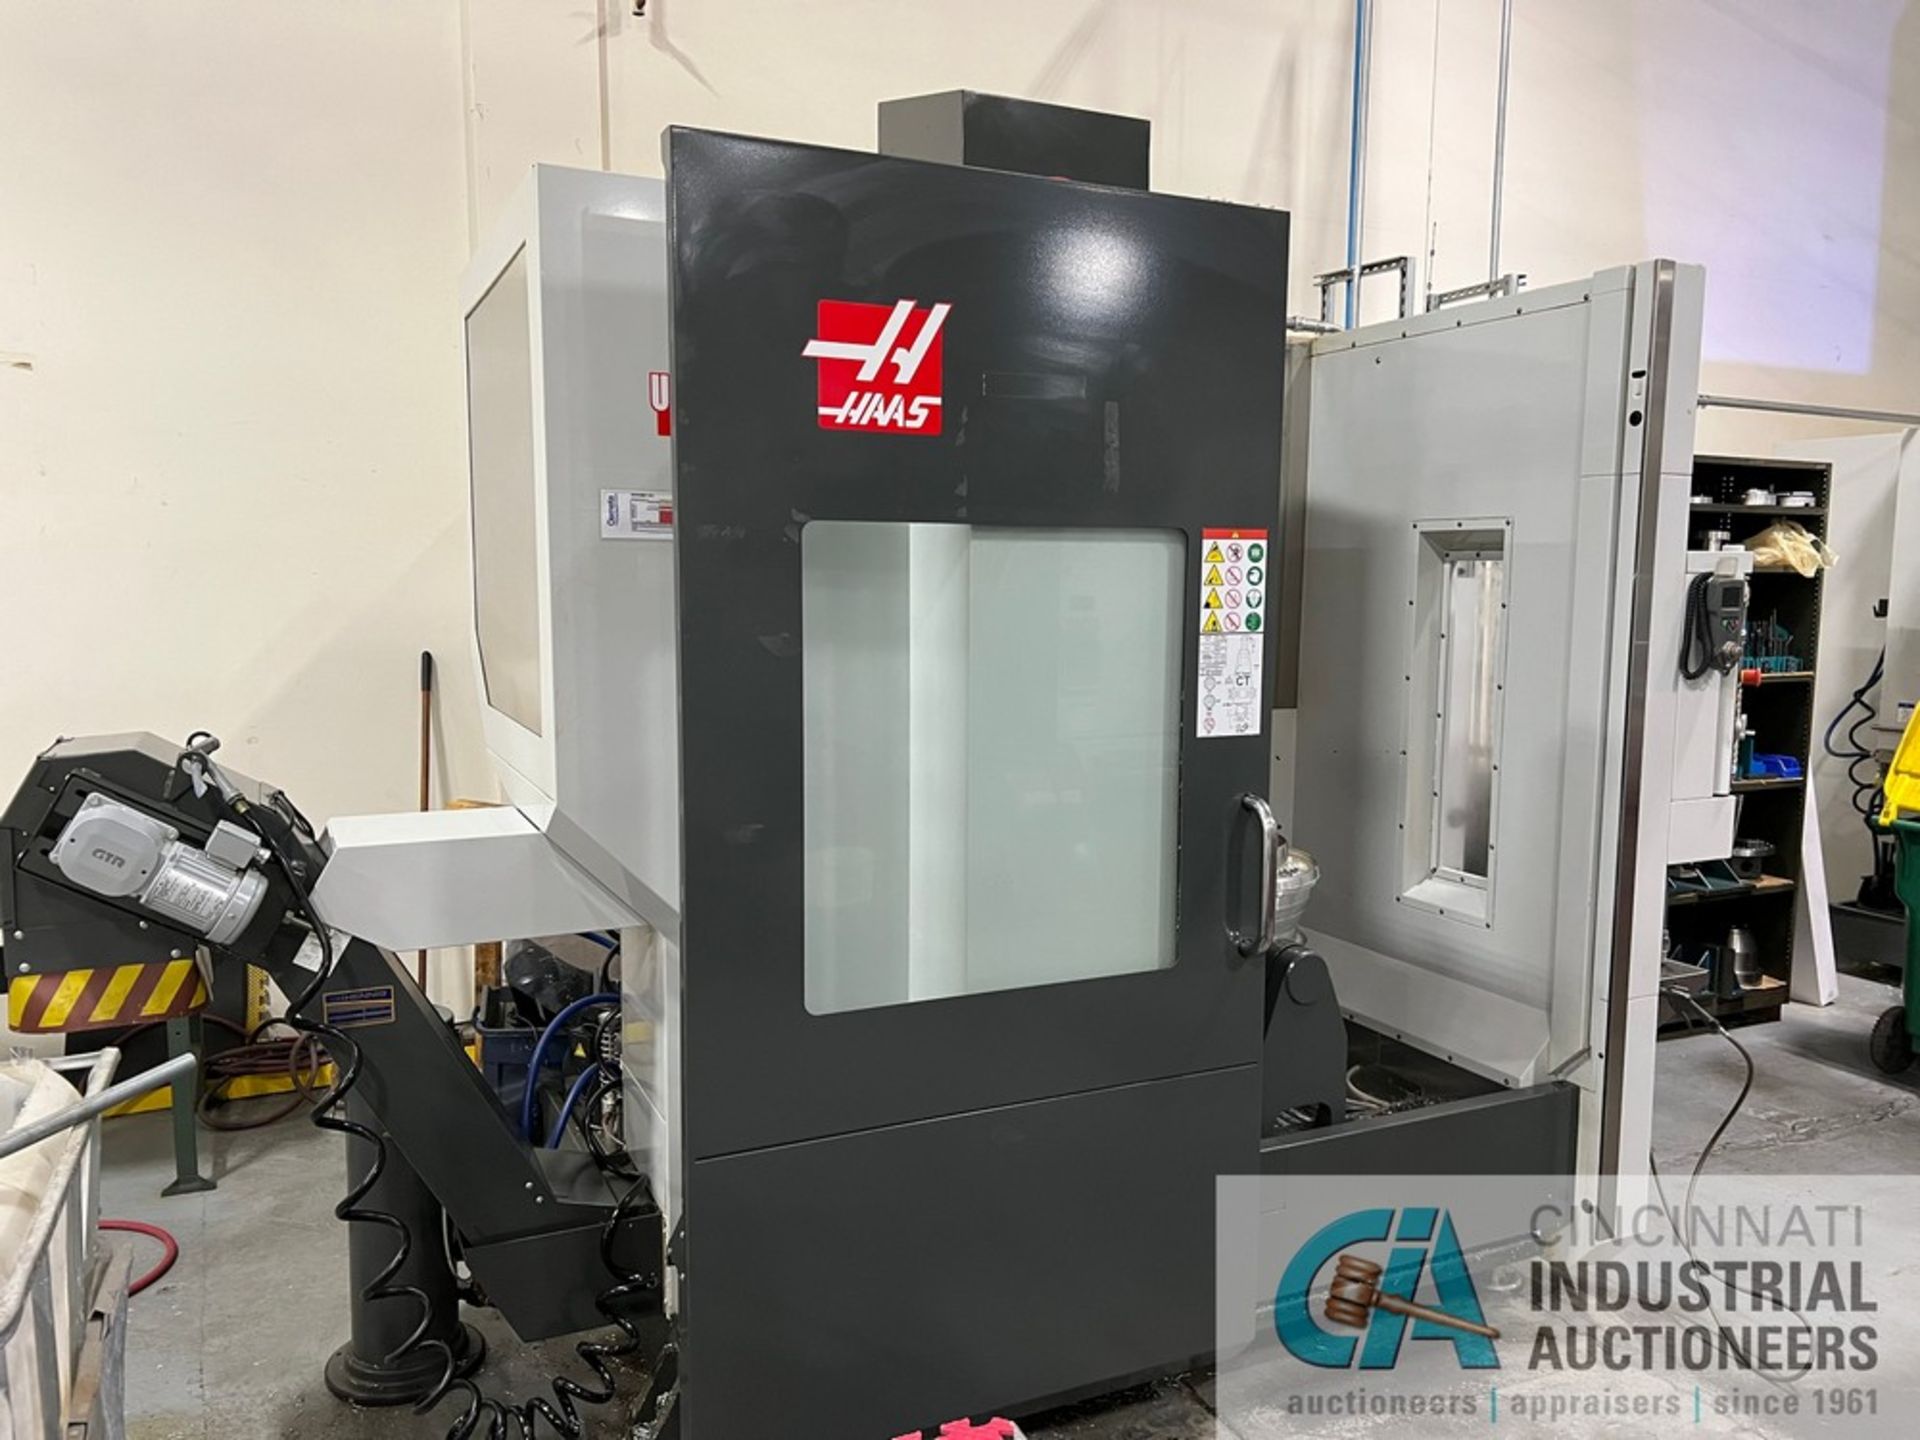 Haas Model UMC-750 Five-Axis CNC Universal Machining Center (2017) 6,578 Cutting Hours Showing - Image 6 of 19